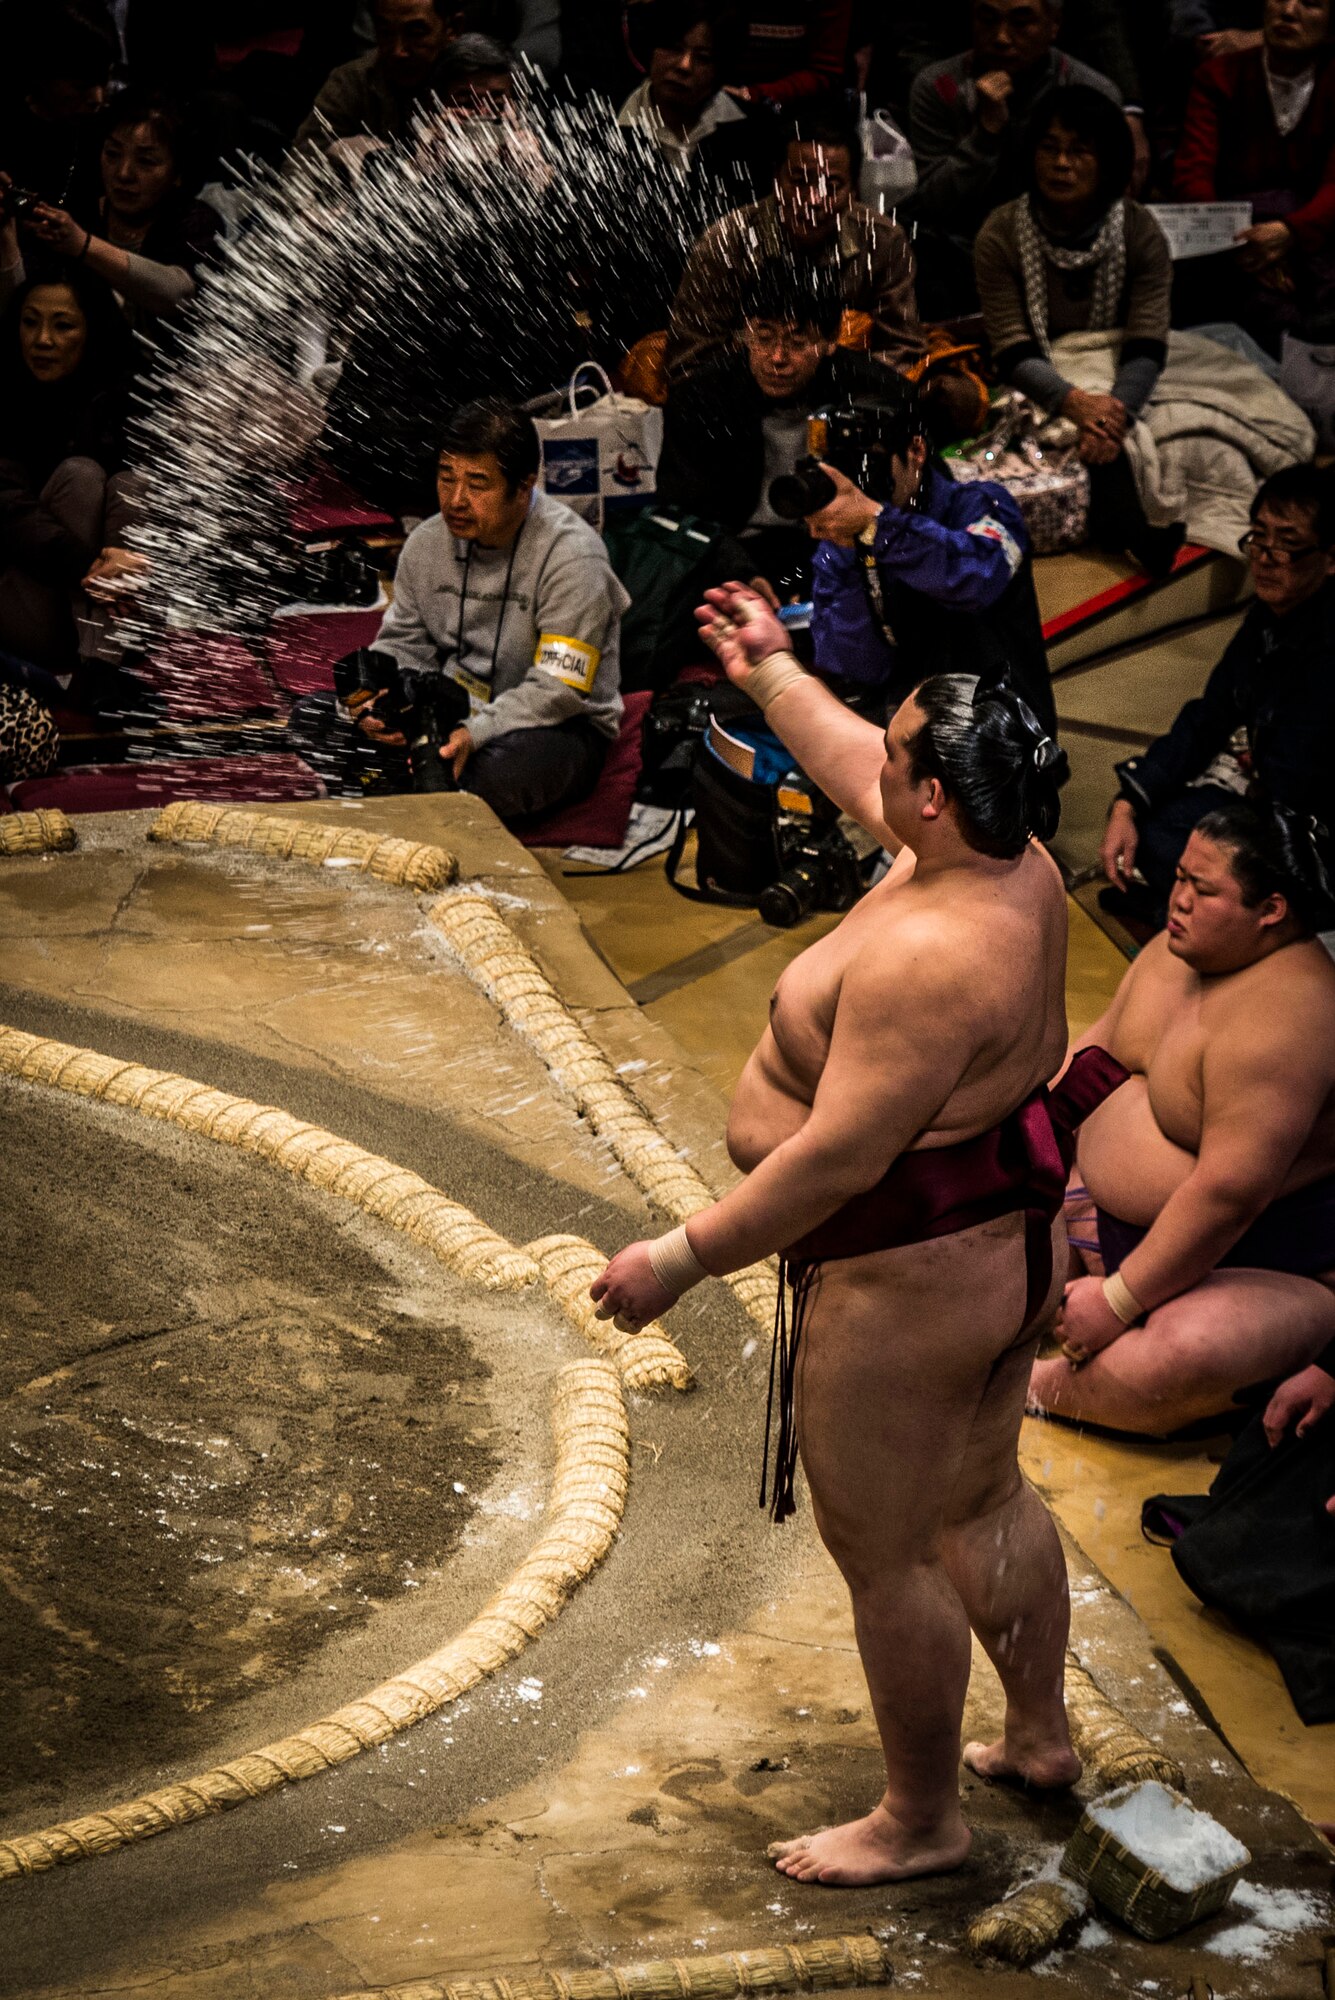 YOKOTA AIR BASE,Japan -- A Sumo wrestler throws salt into the ring as part of a purification ritual before a bout during the Grand Sumo Tournament at the Ryogoku Kokugikan Sumo Hall in Tokyo, Feb. 10, 2013. Sumo involves several ritual elements developed over a history of centuries. (U.S. Air Force photo by Capt. Raymond Geoffroy)